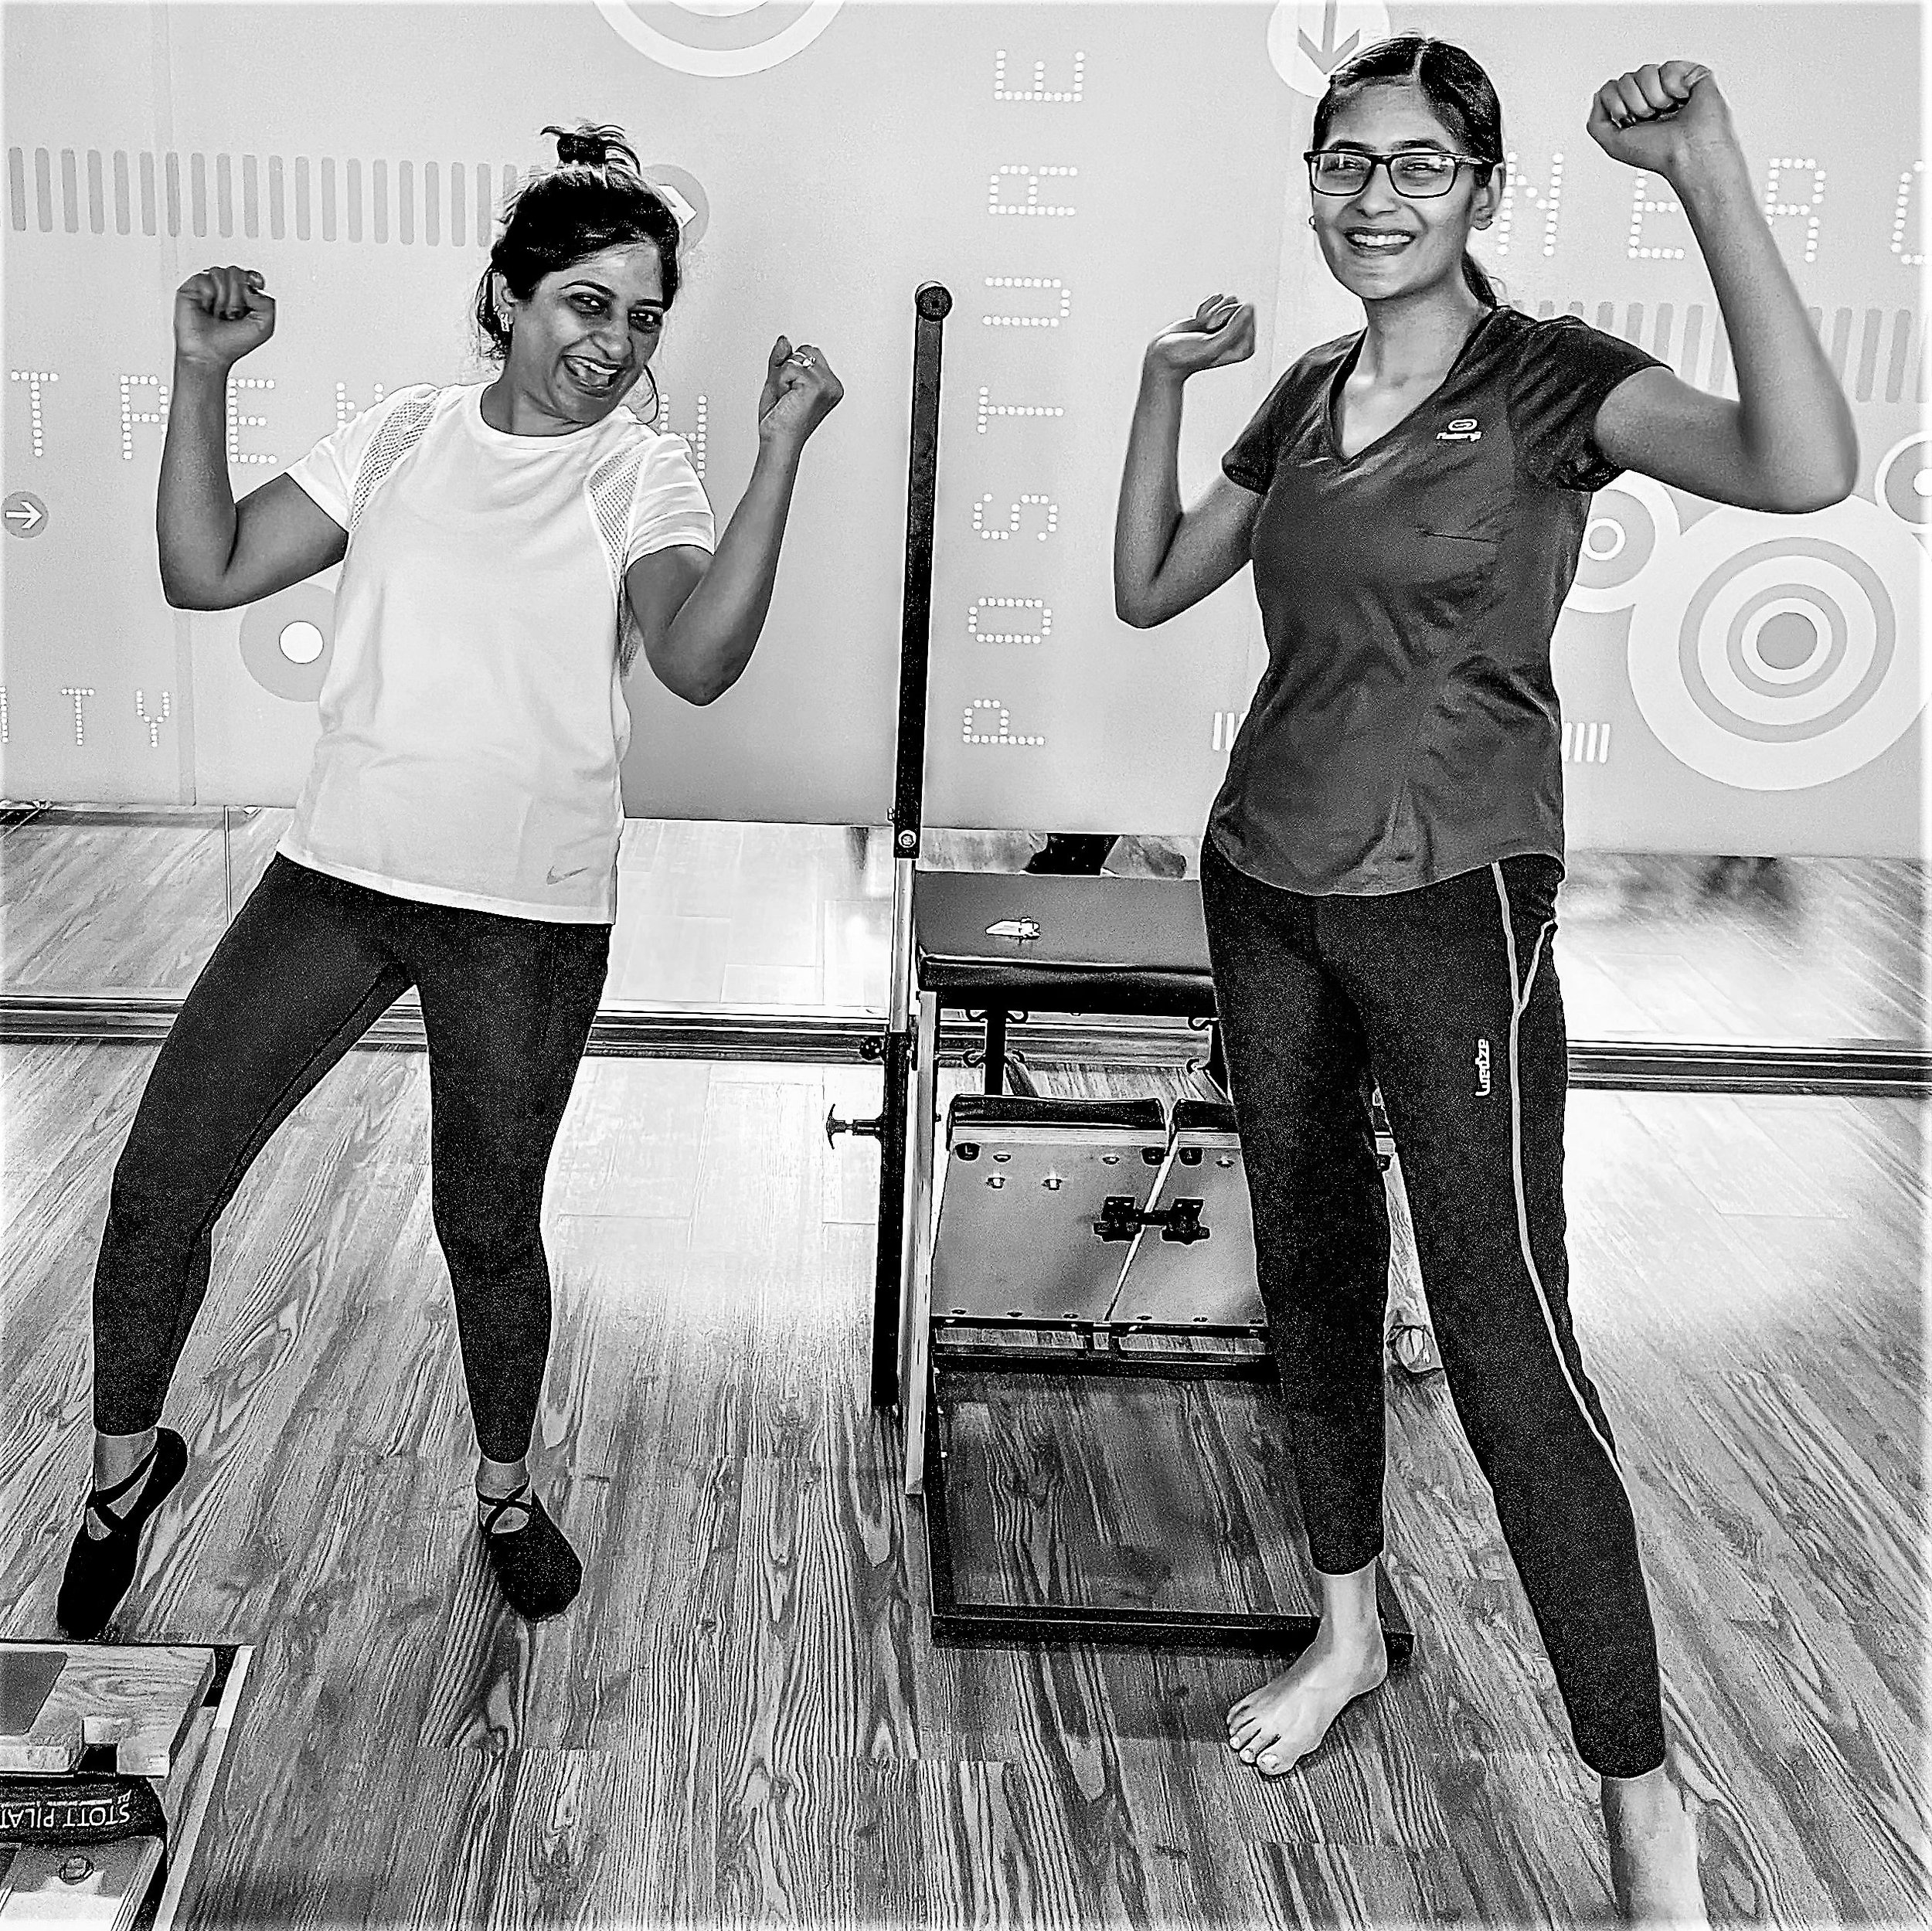 Personal Training workouts at The Zone Studio, Koramangala. For varied fitness levels and age groups.